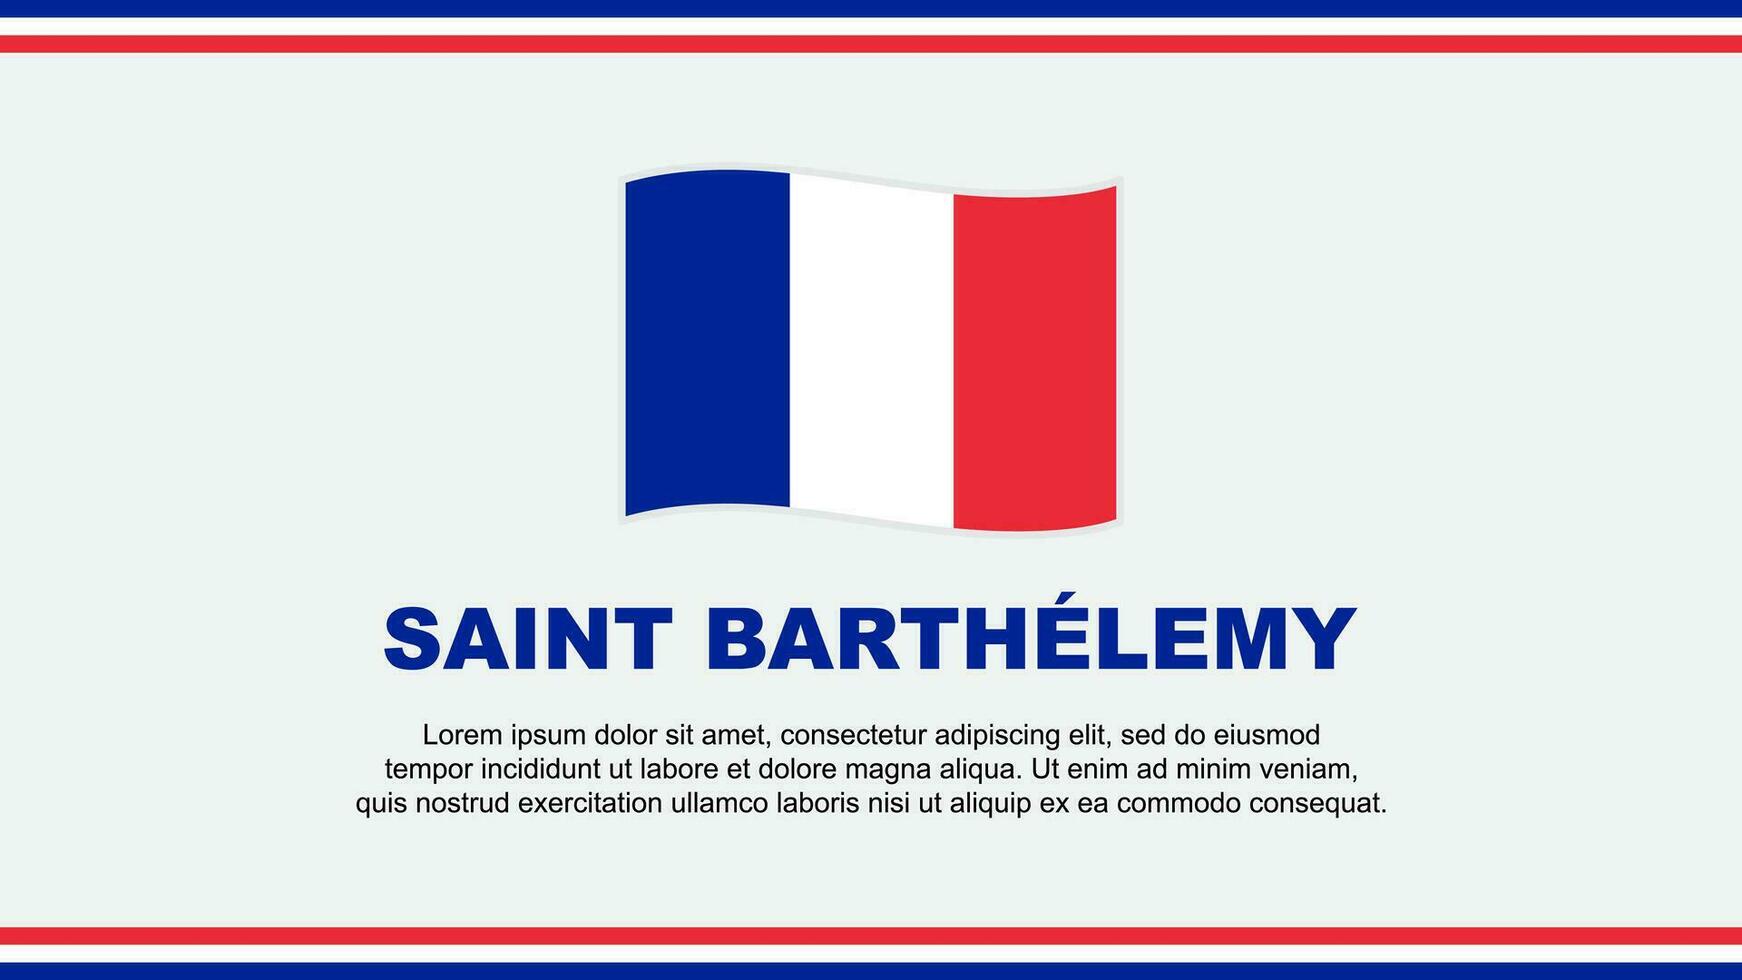 Saint Barthelemy Flag Abstract Background Design Template. Saint Barthelemy Independence Day Banner Social Media Vector Illustration. Design